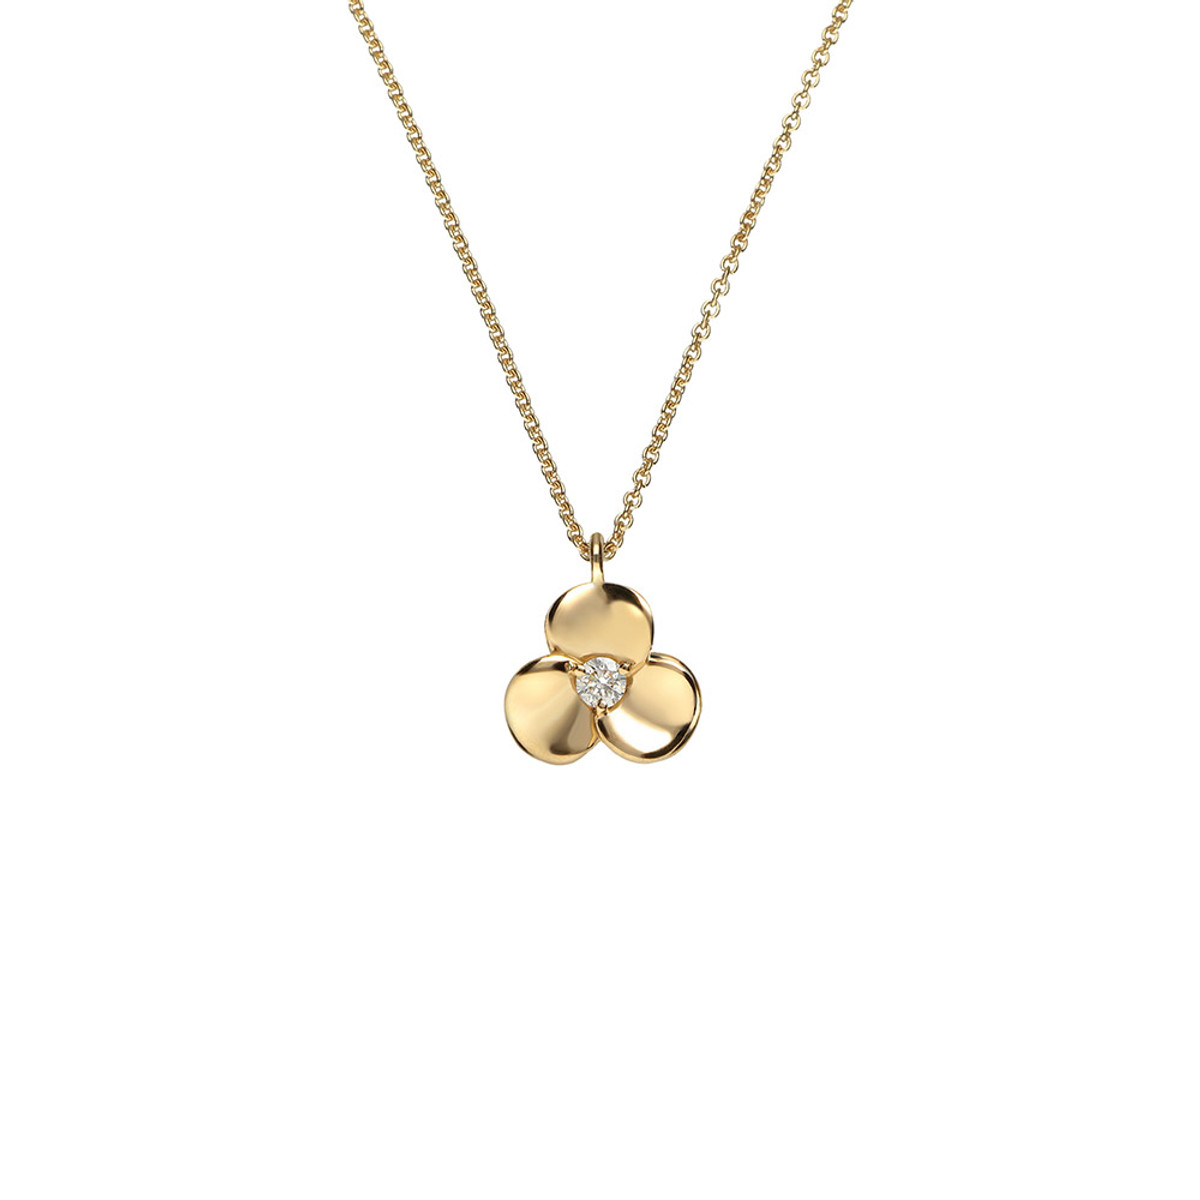 Hyde Park Collection 18K Yellow Gold Diamond Flower Necklace-44592 Product Image